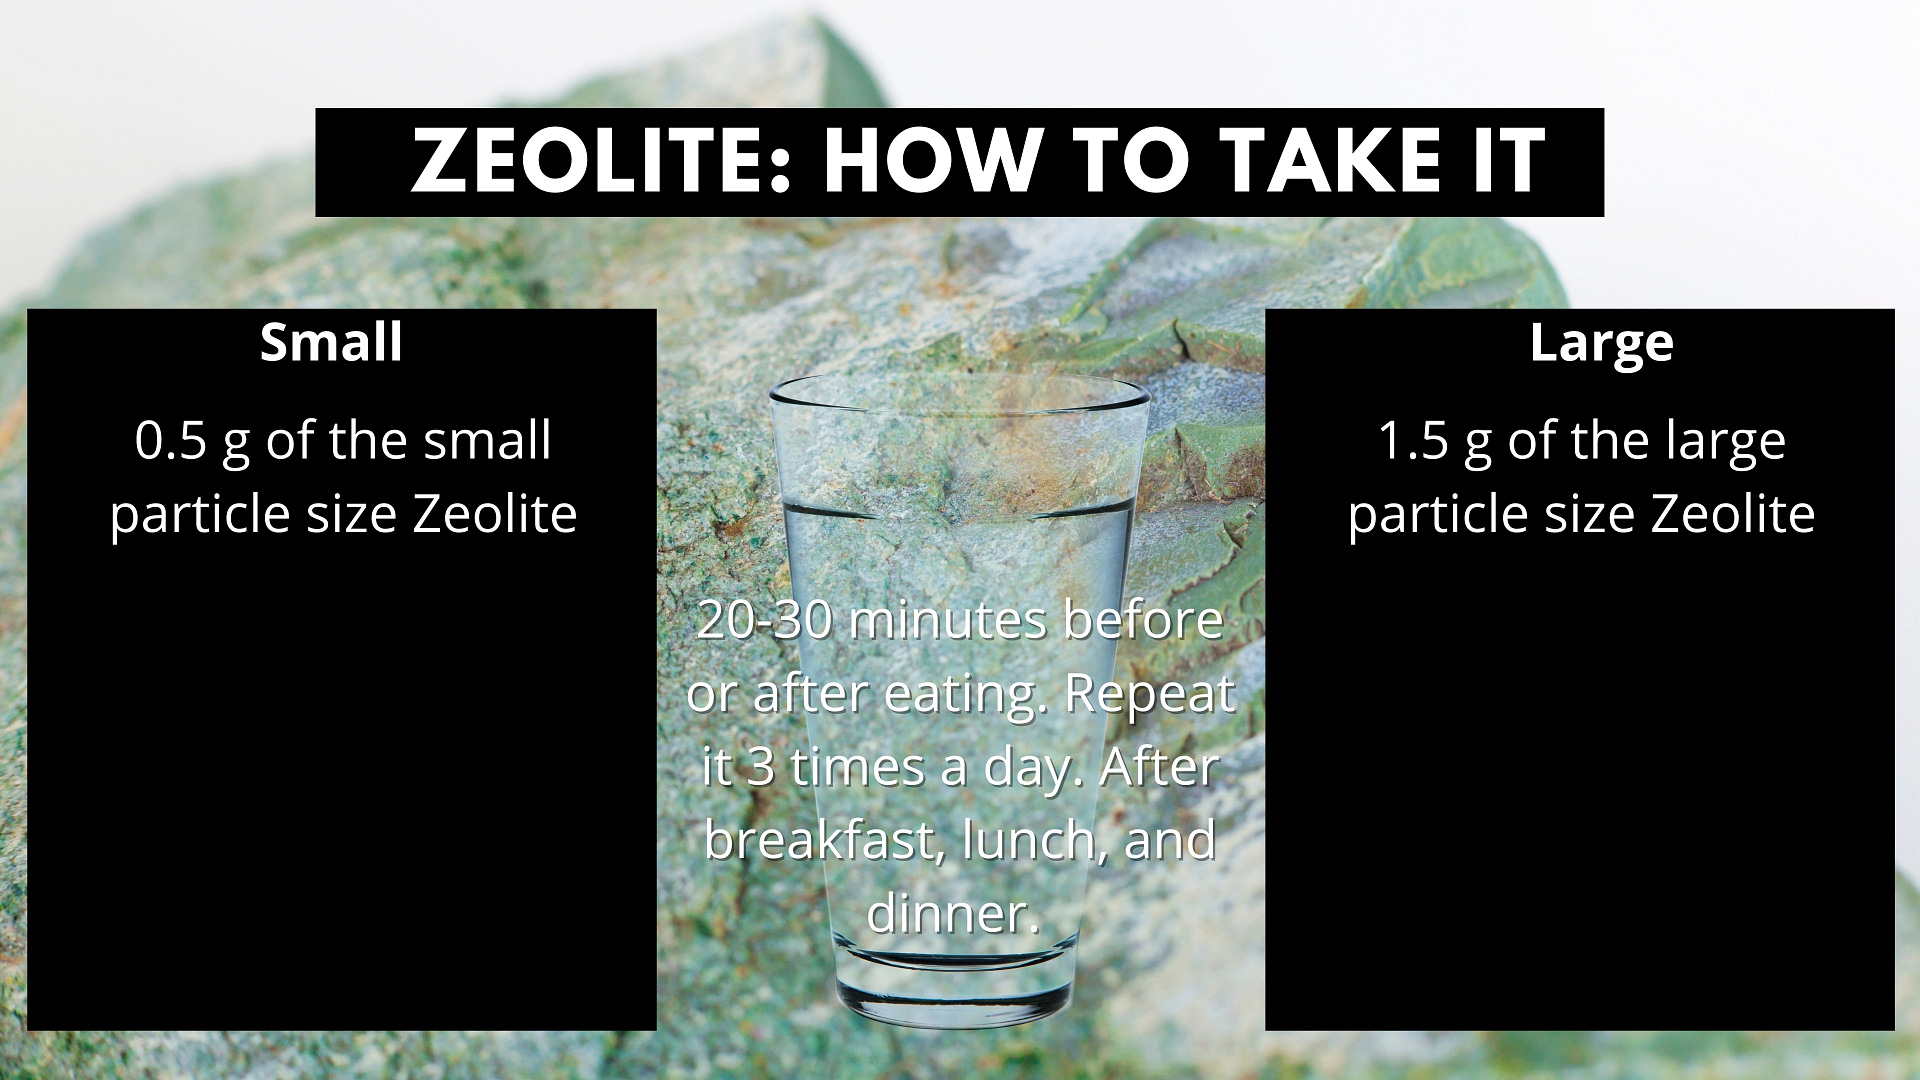 How to take zeolite, small and large particle size?